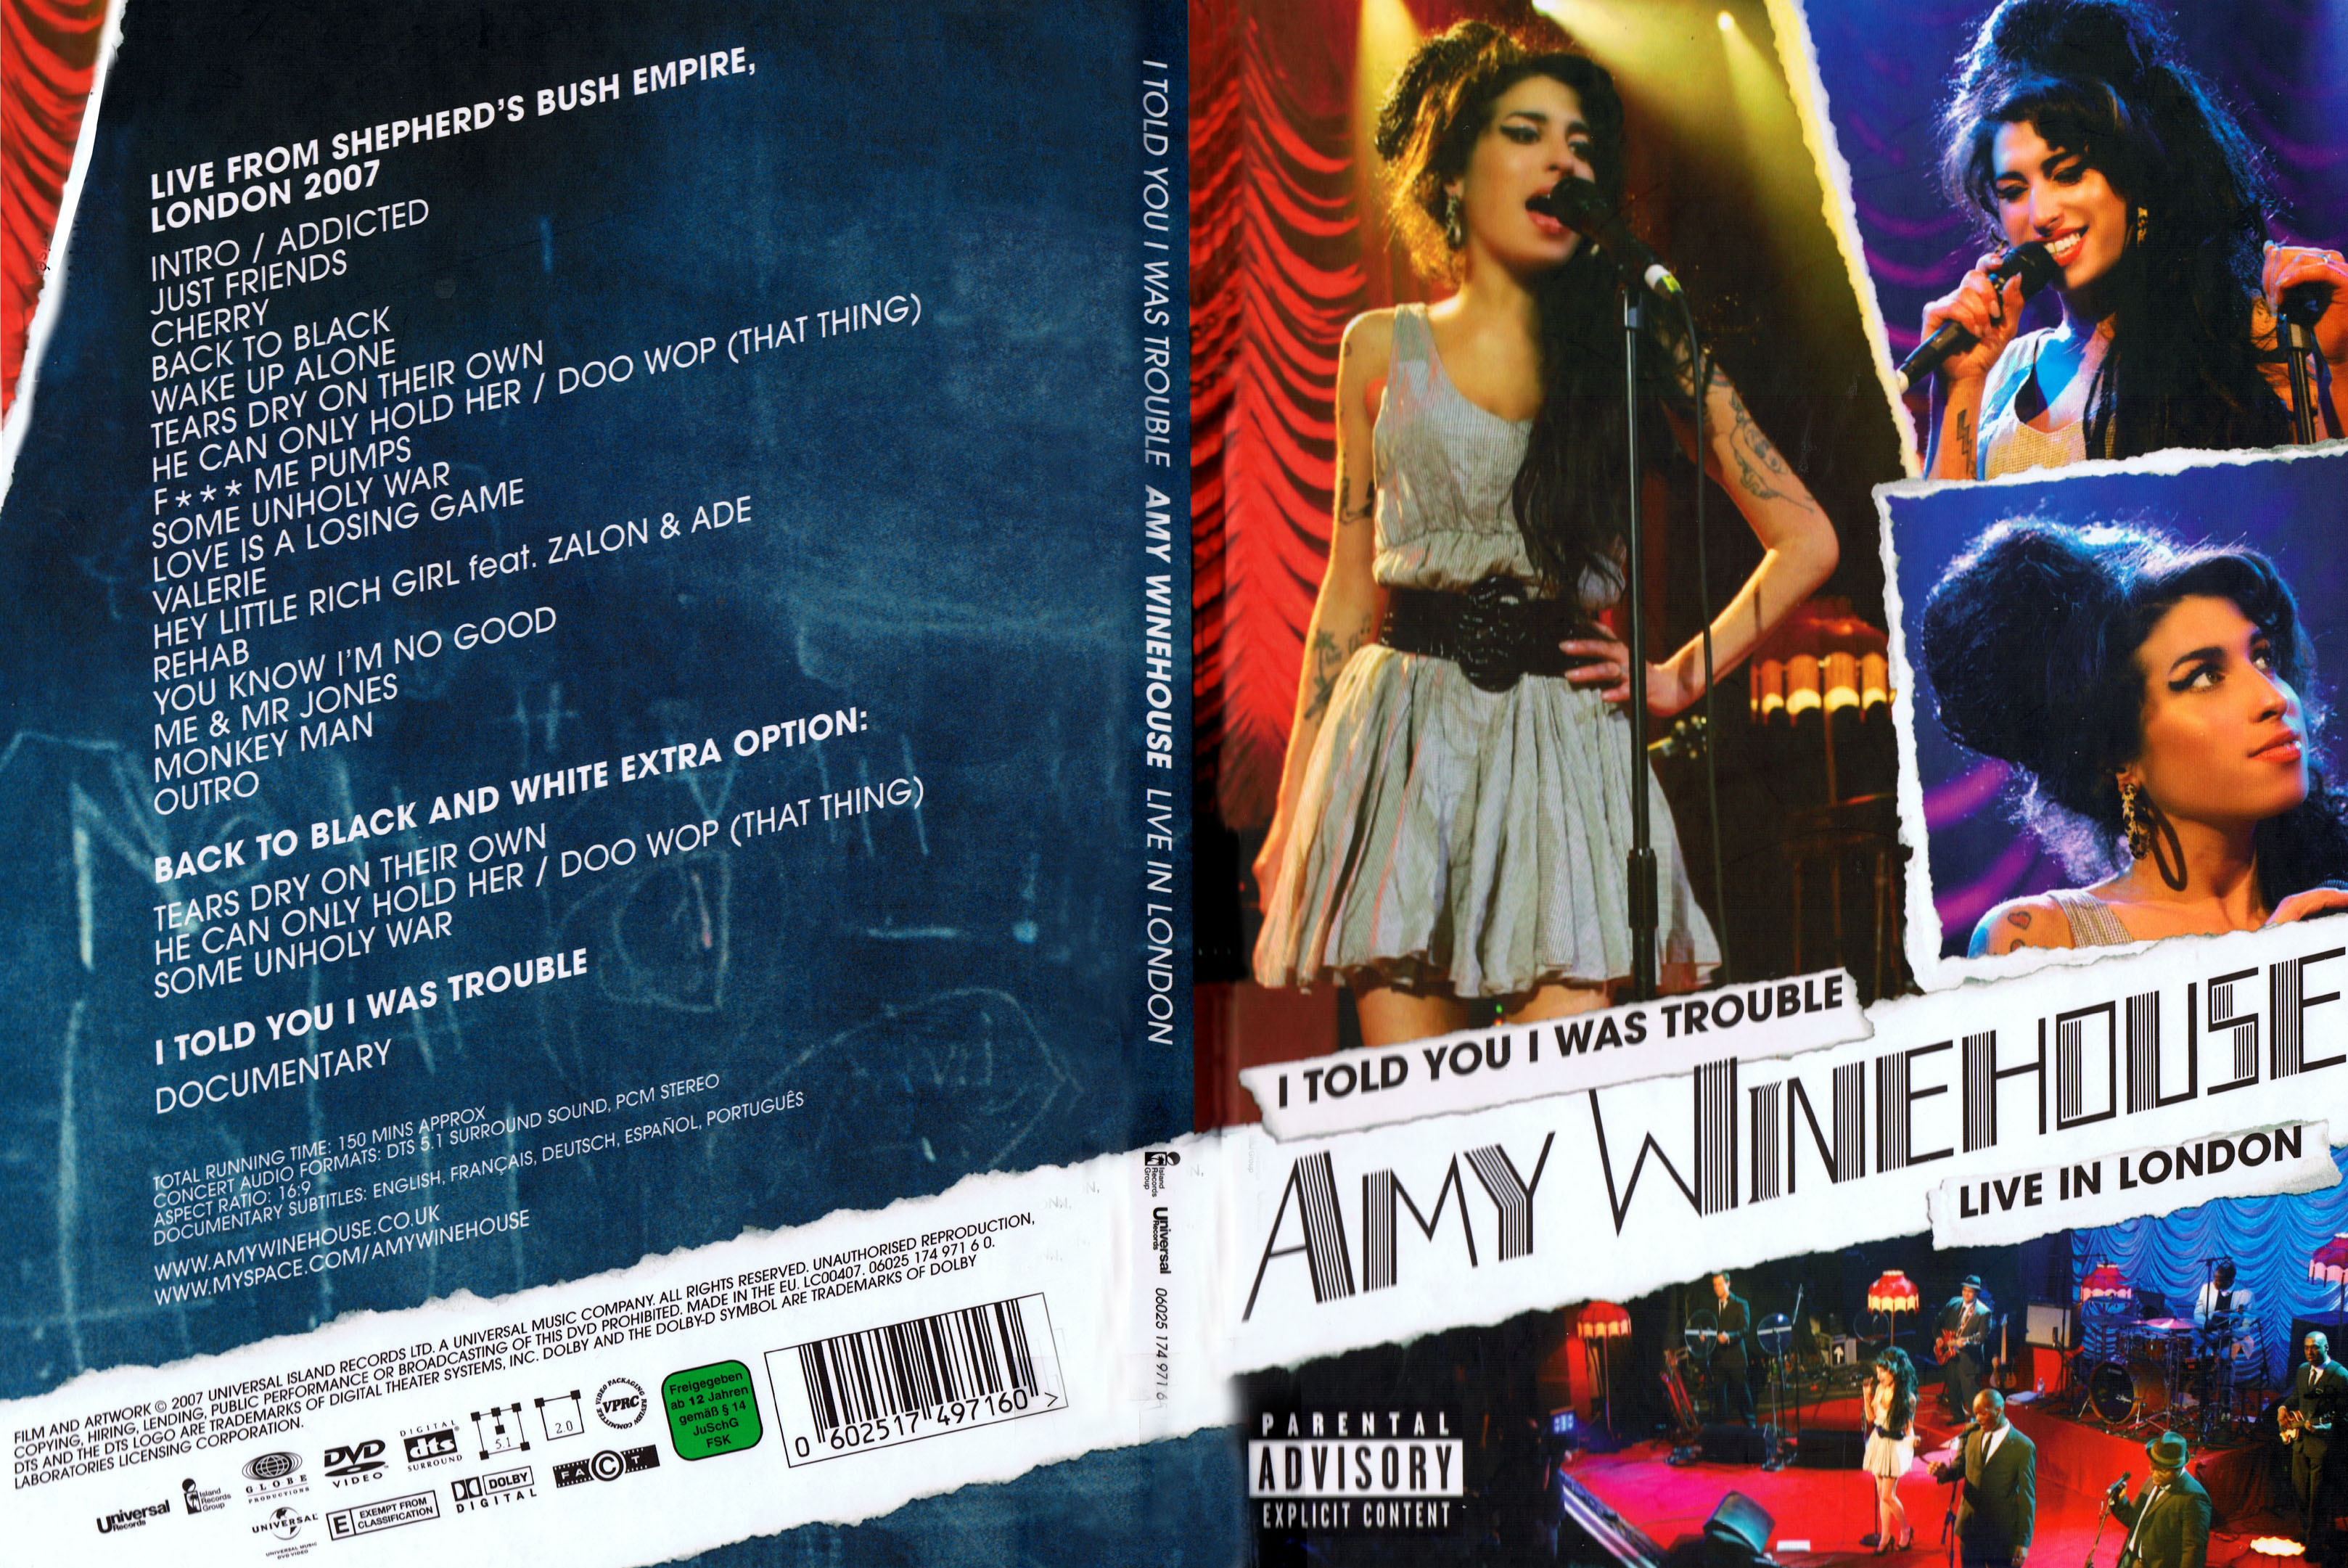 Jaquette DVD Amy Winehouse - I told you I was trouble - Live in london